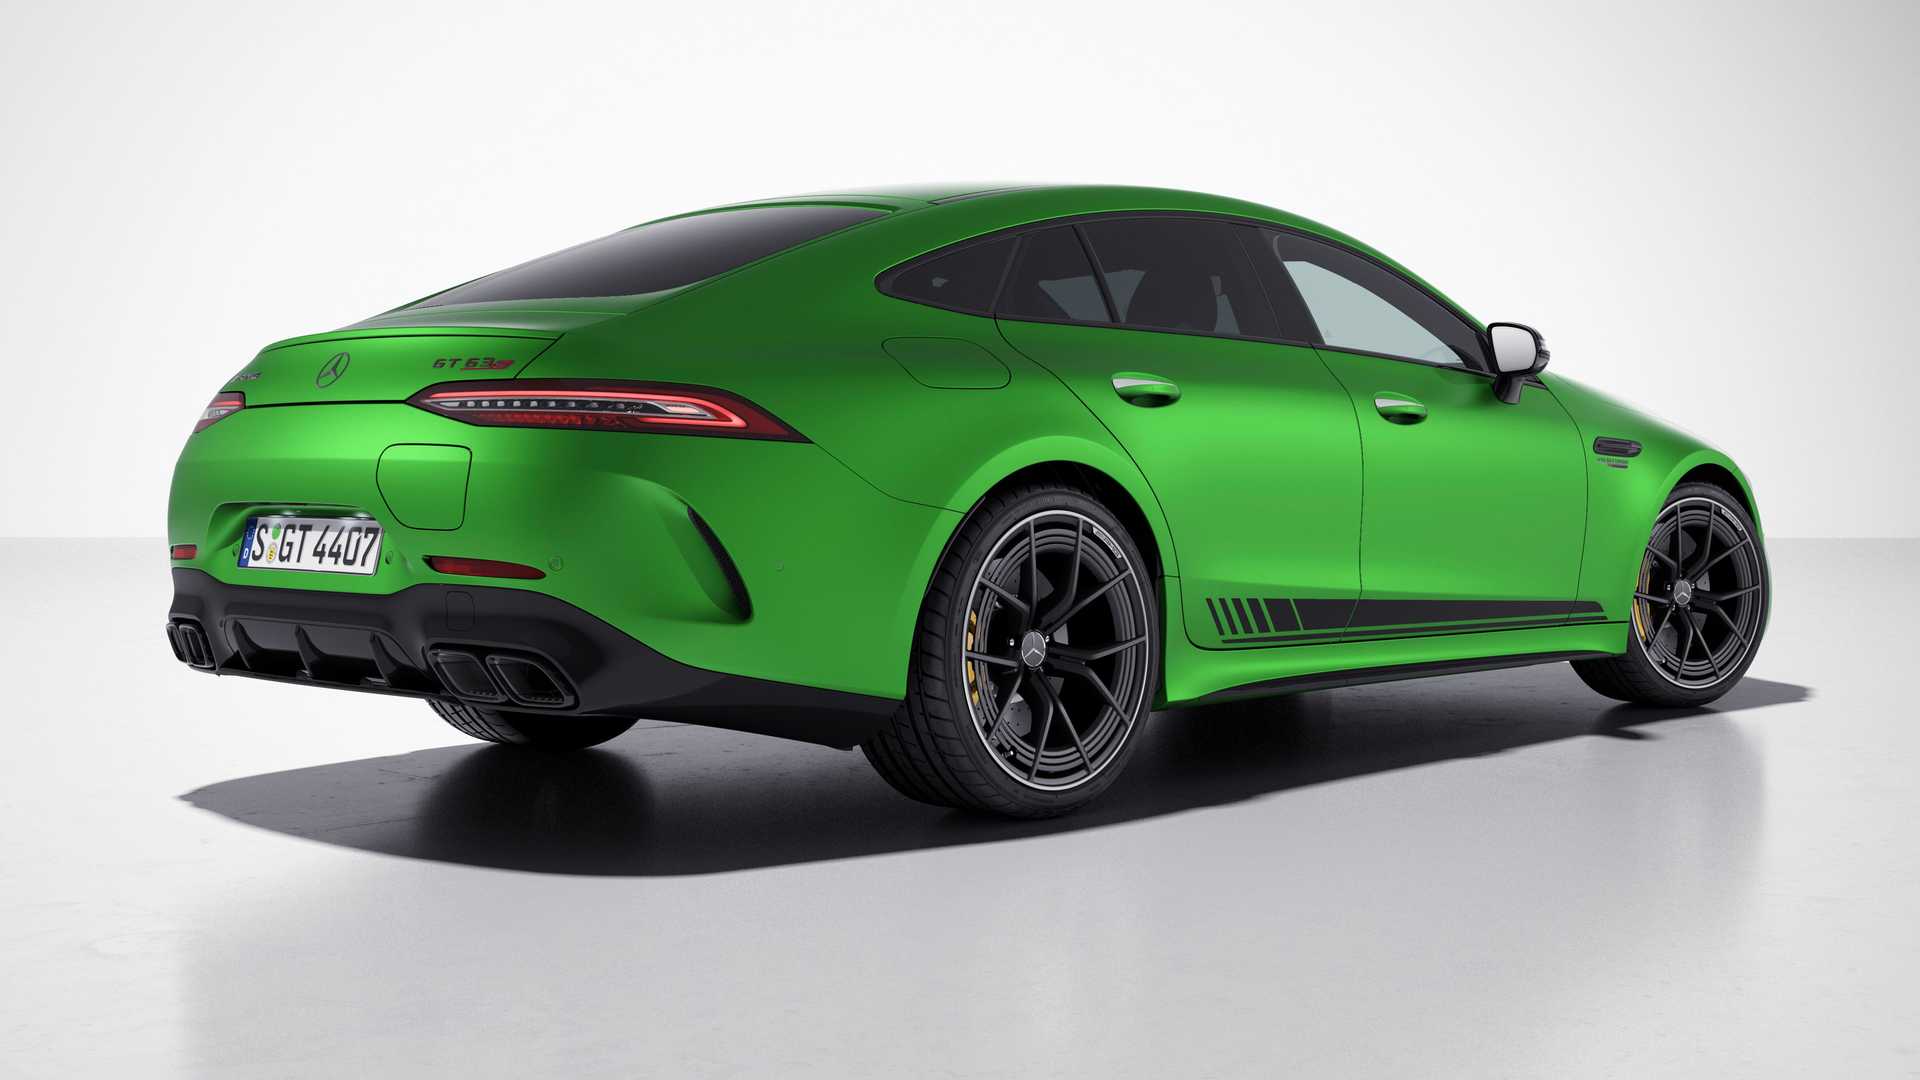 Mercedes-AMG GT63 S E Performance Edition